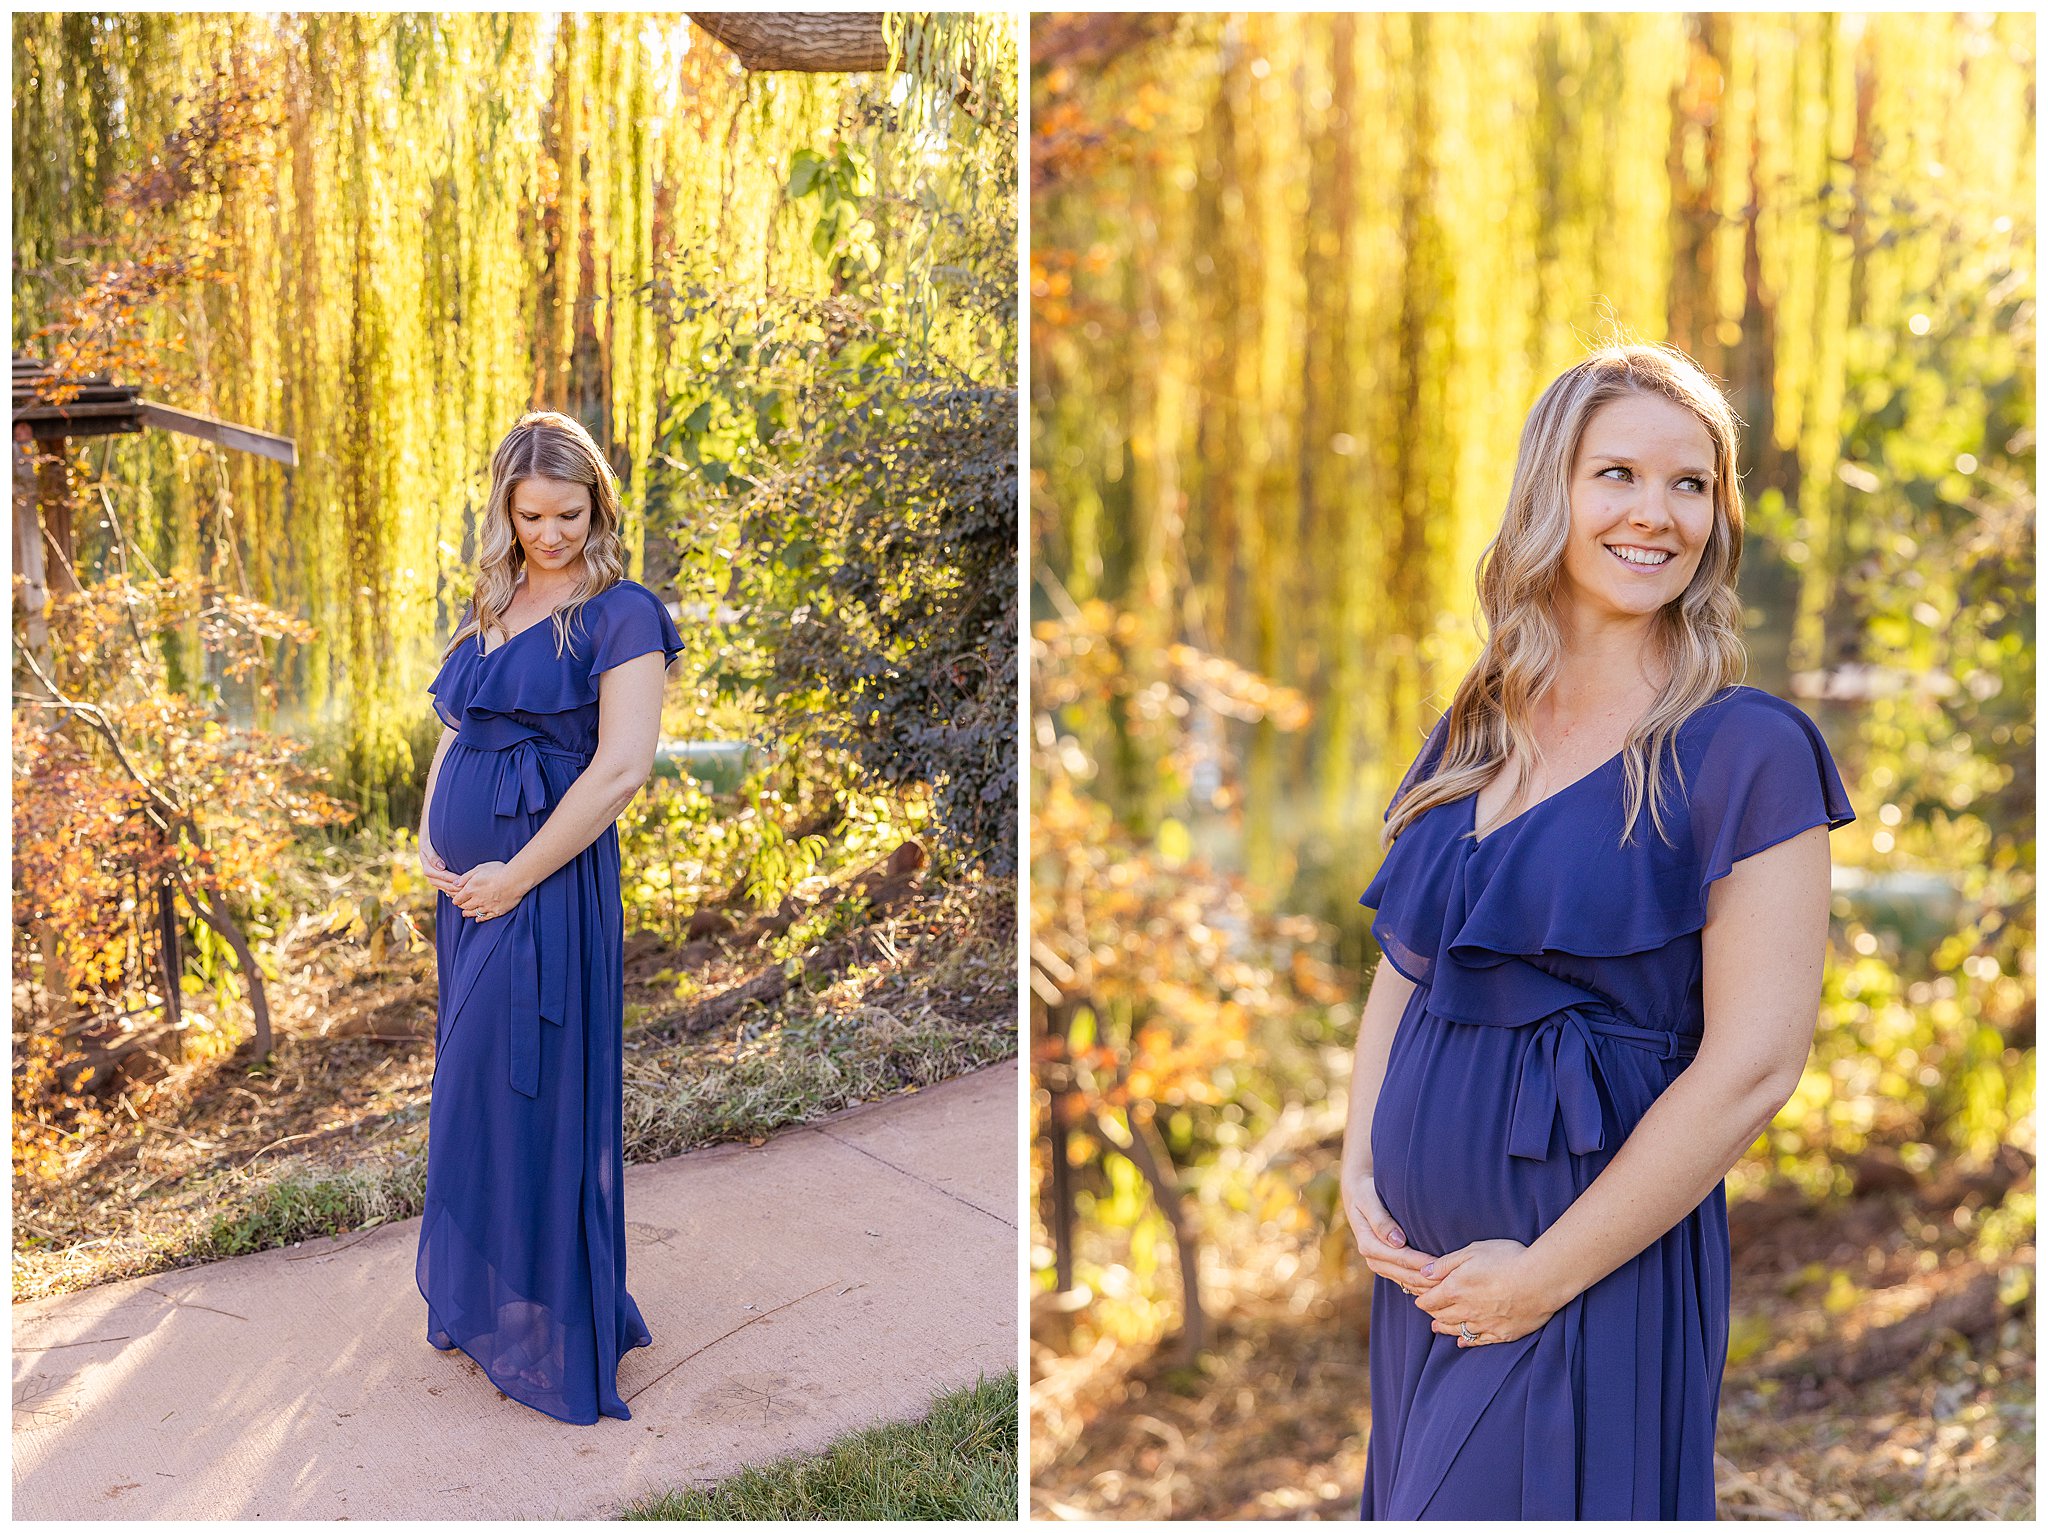 White Ranch Events Fall Family Mini Sessions Willow Tree Dog Maternity Chico CA November,